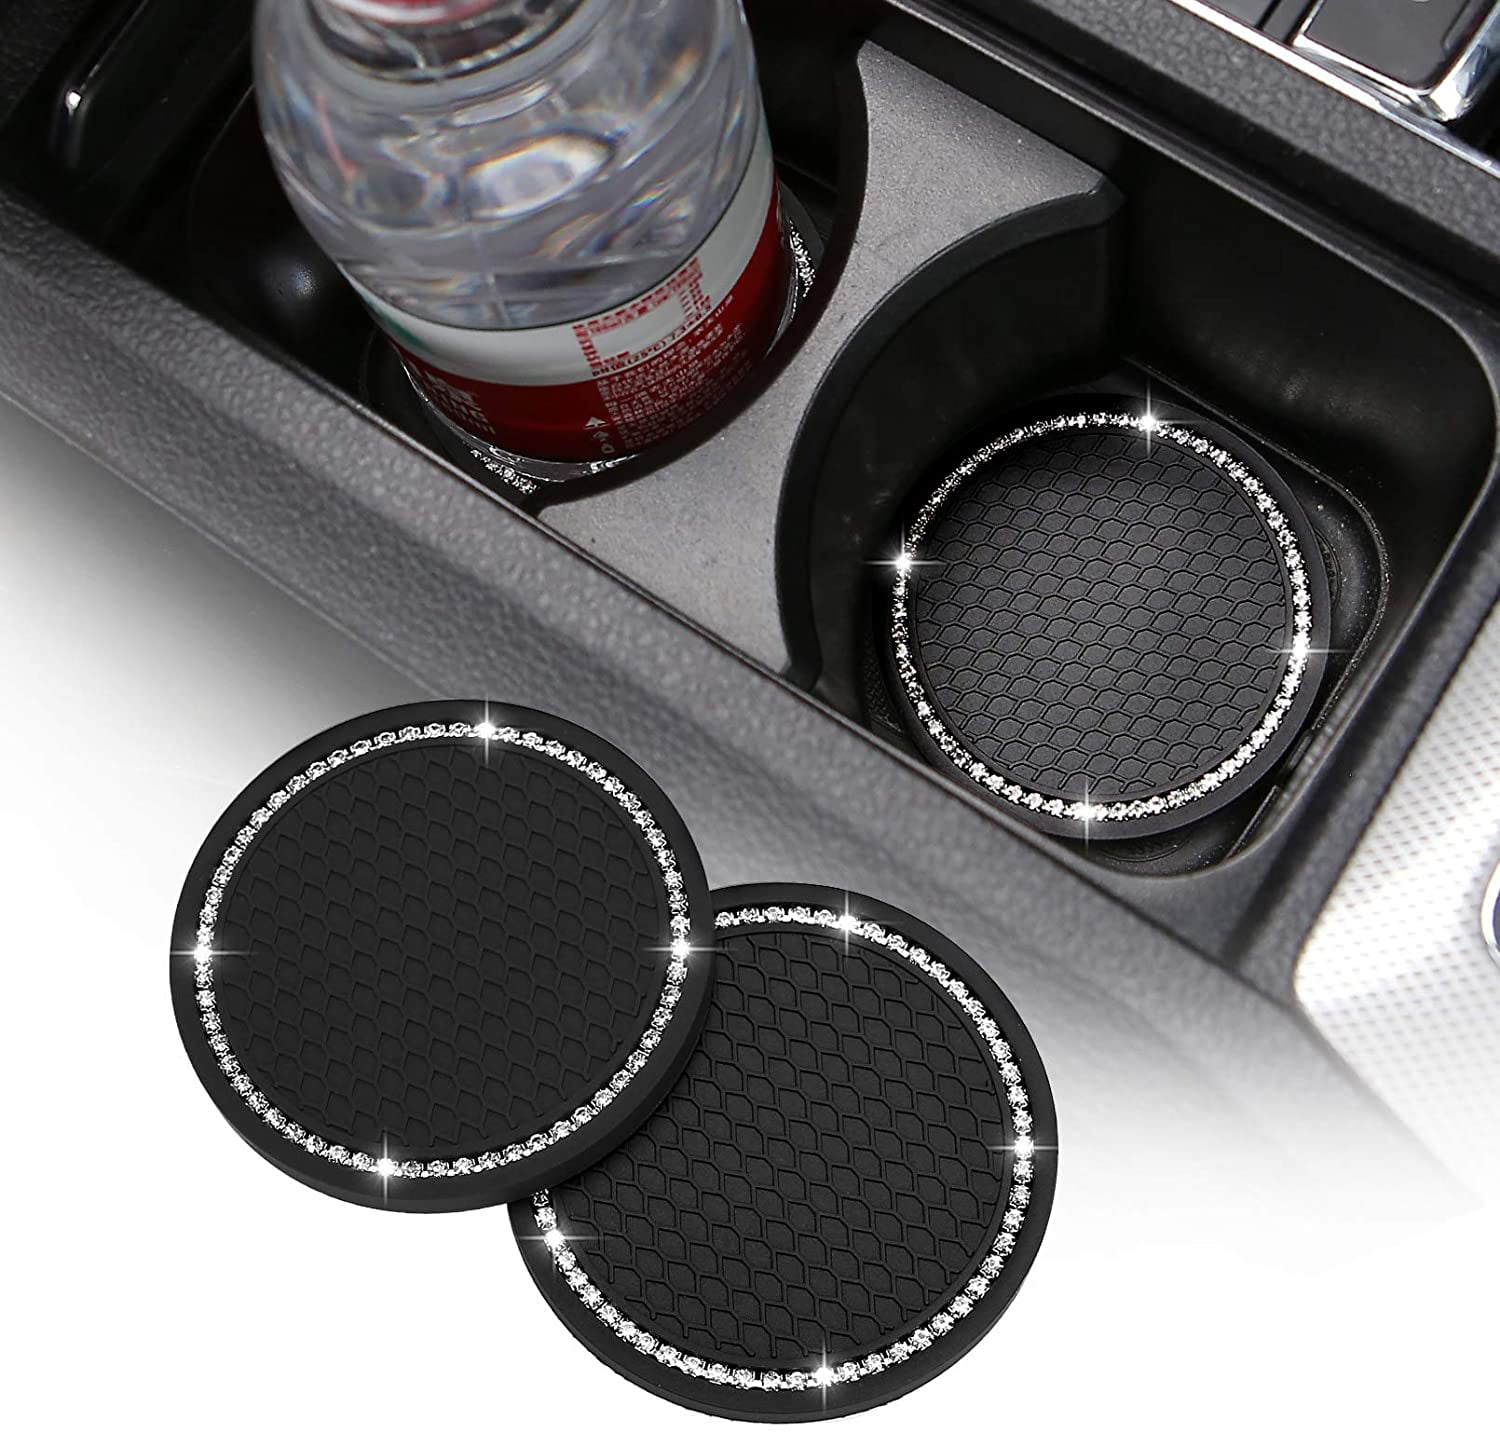 BMW Suitable for BMW Accessories Silicone Coasters 2 Pieces X 2 Pieces of 2.75 inch Universal car Cup Holders to Insert Coasters for car Interior Accessories 